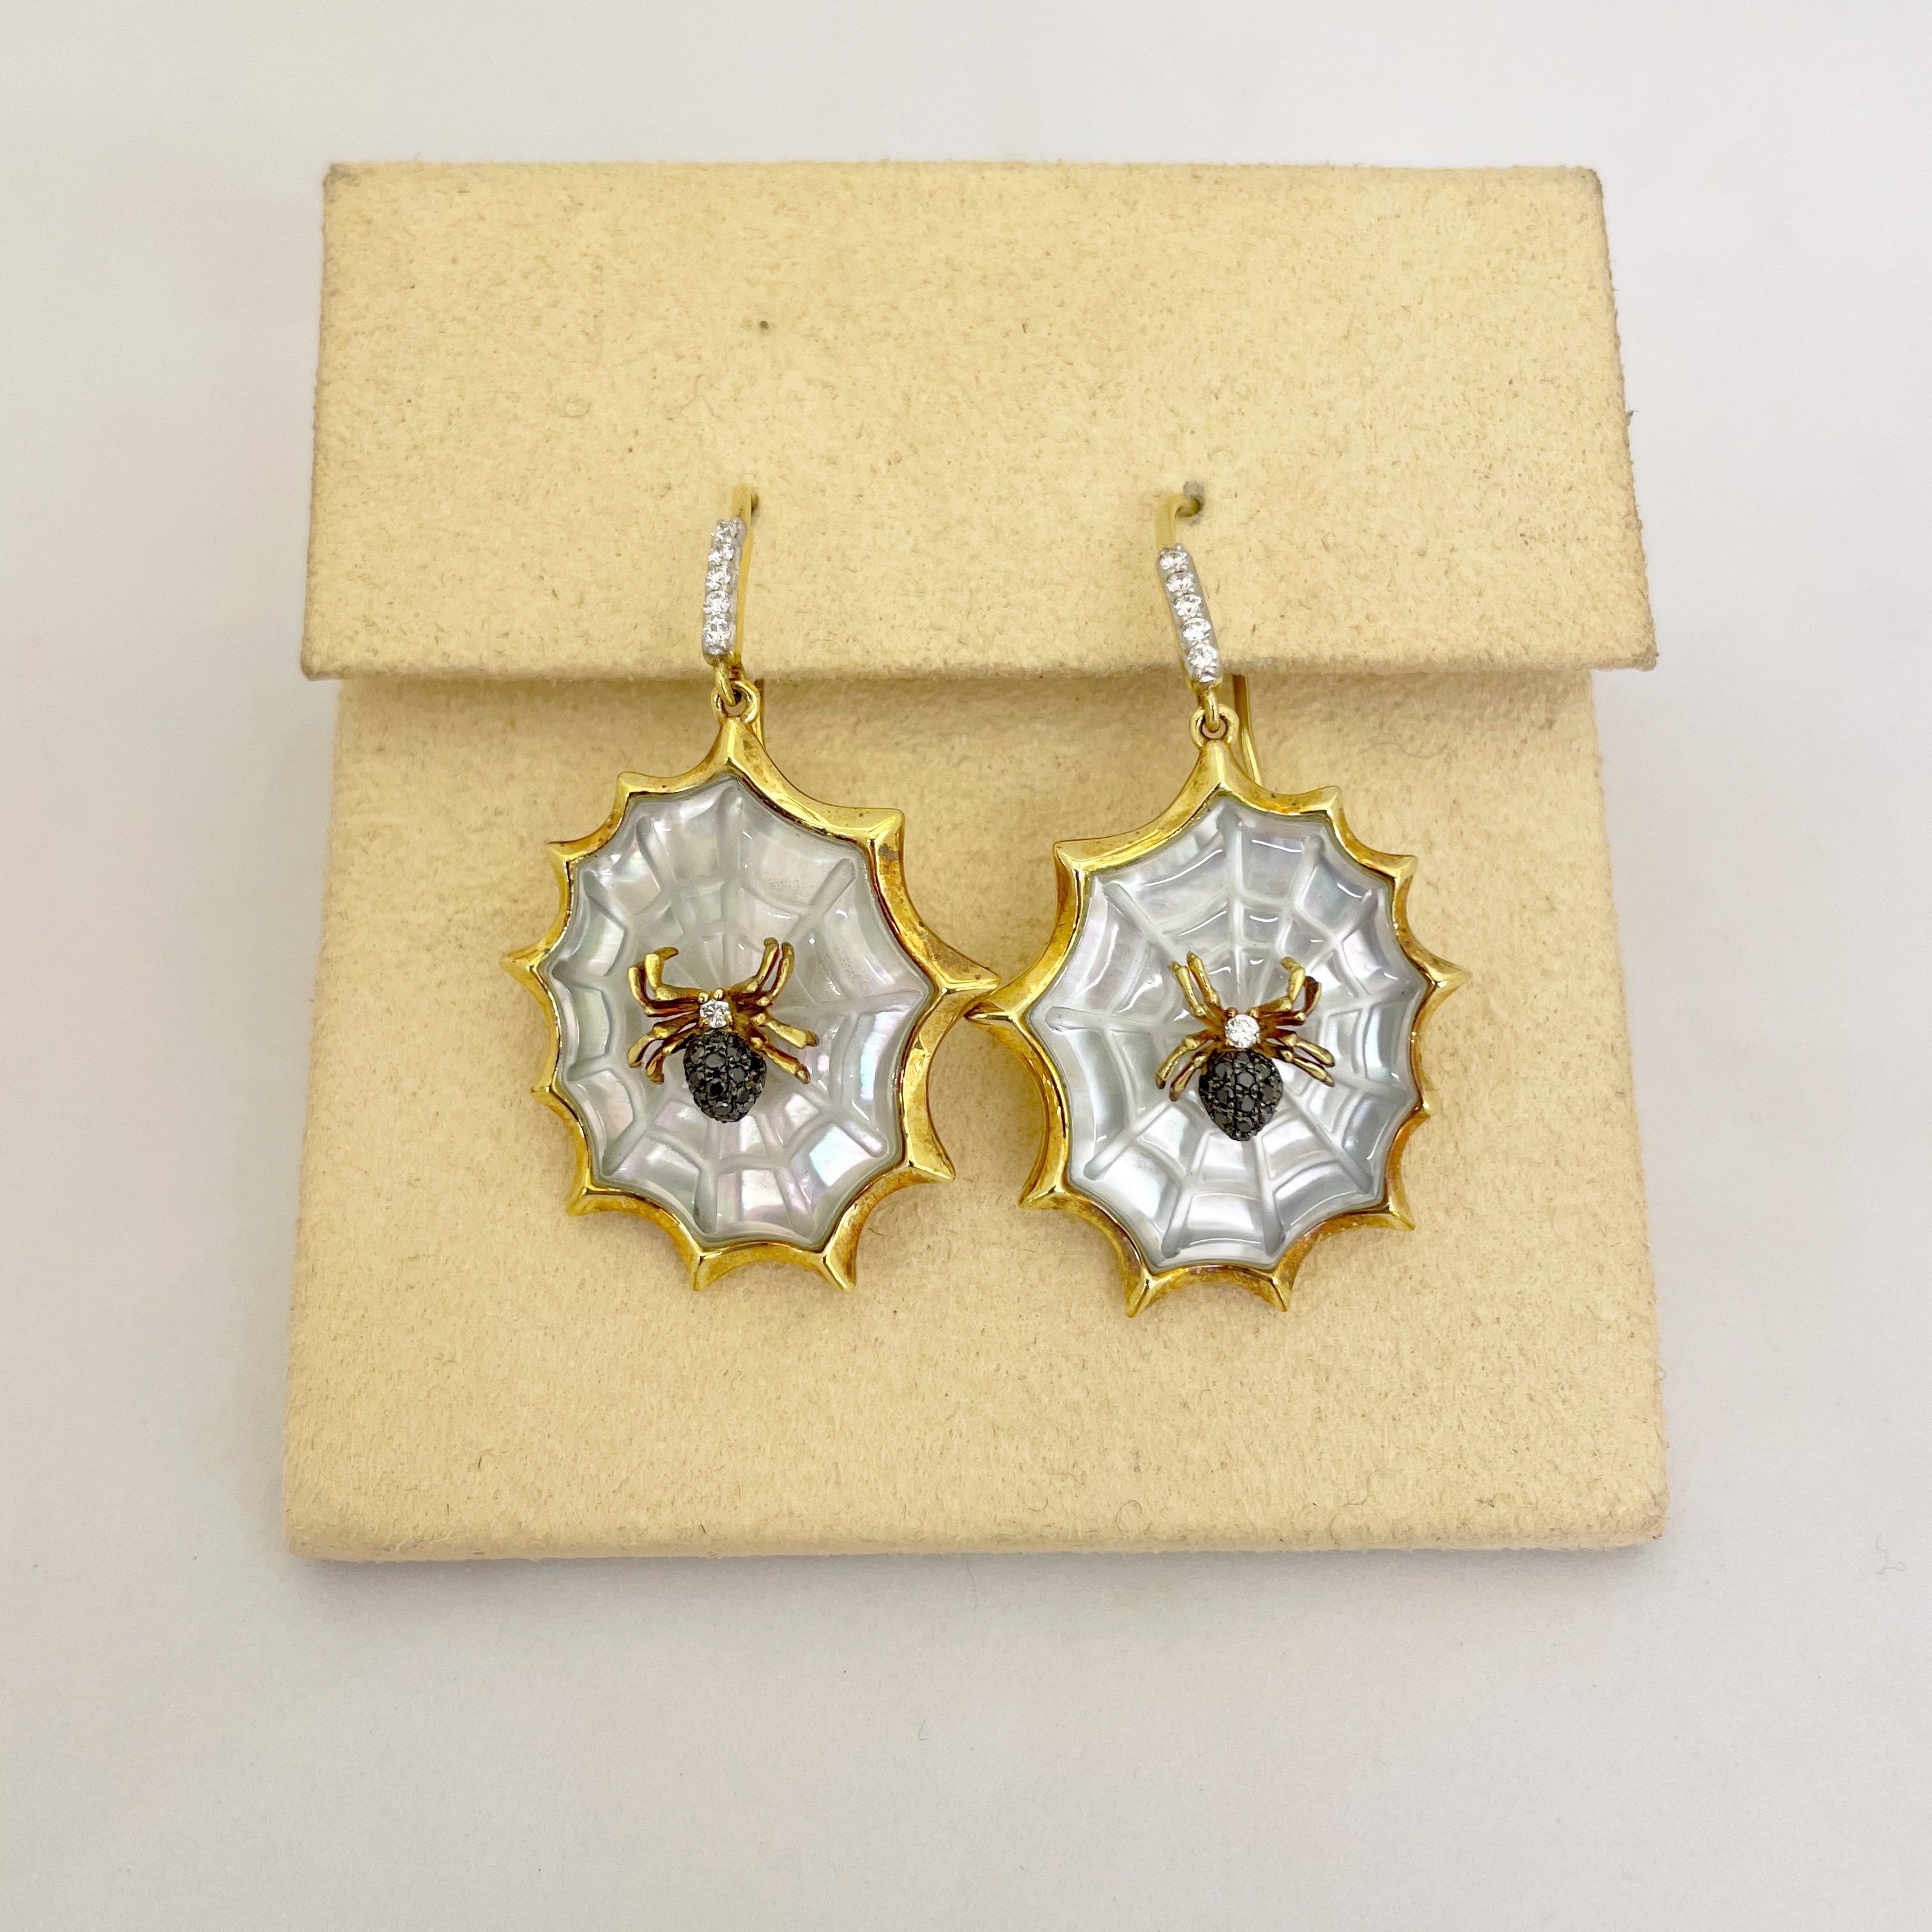 Designed by Asch Grossbardt, these unique 18 karat yellow gold earrings are crafted as bejeweled spiders sitting on their web. Hand carved mother of pearl forms the web for the black and white diamond spiders. Round diamonds accent the gold hanging